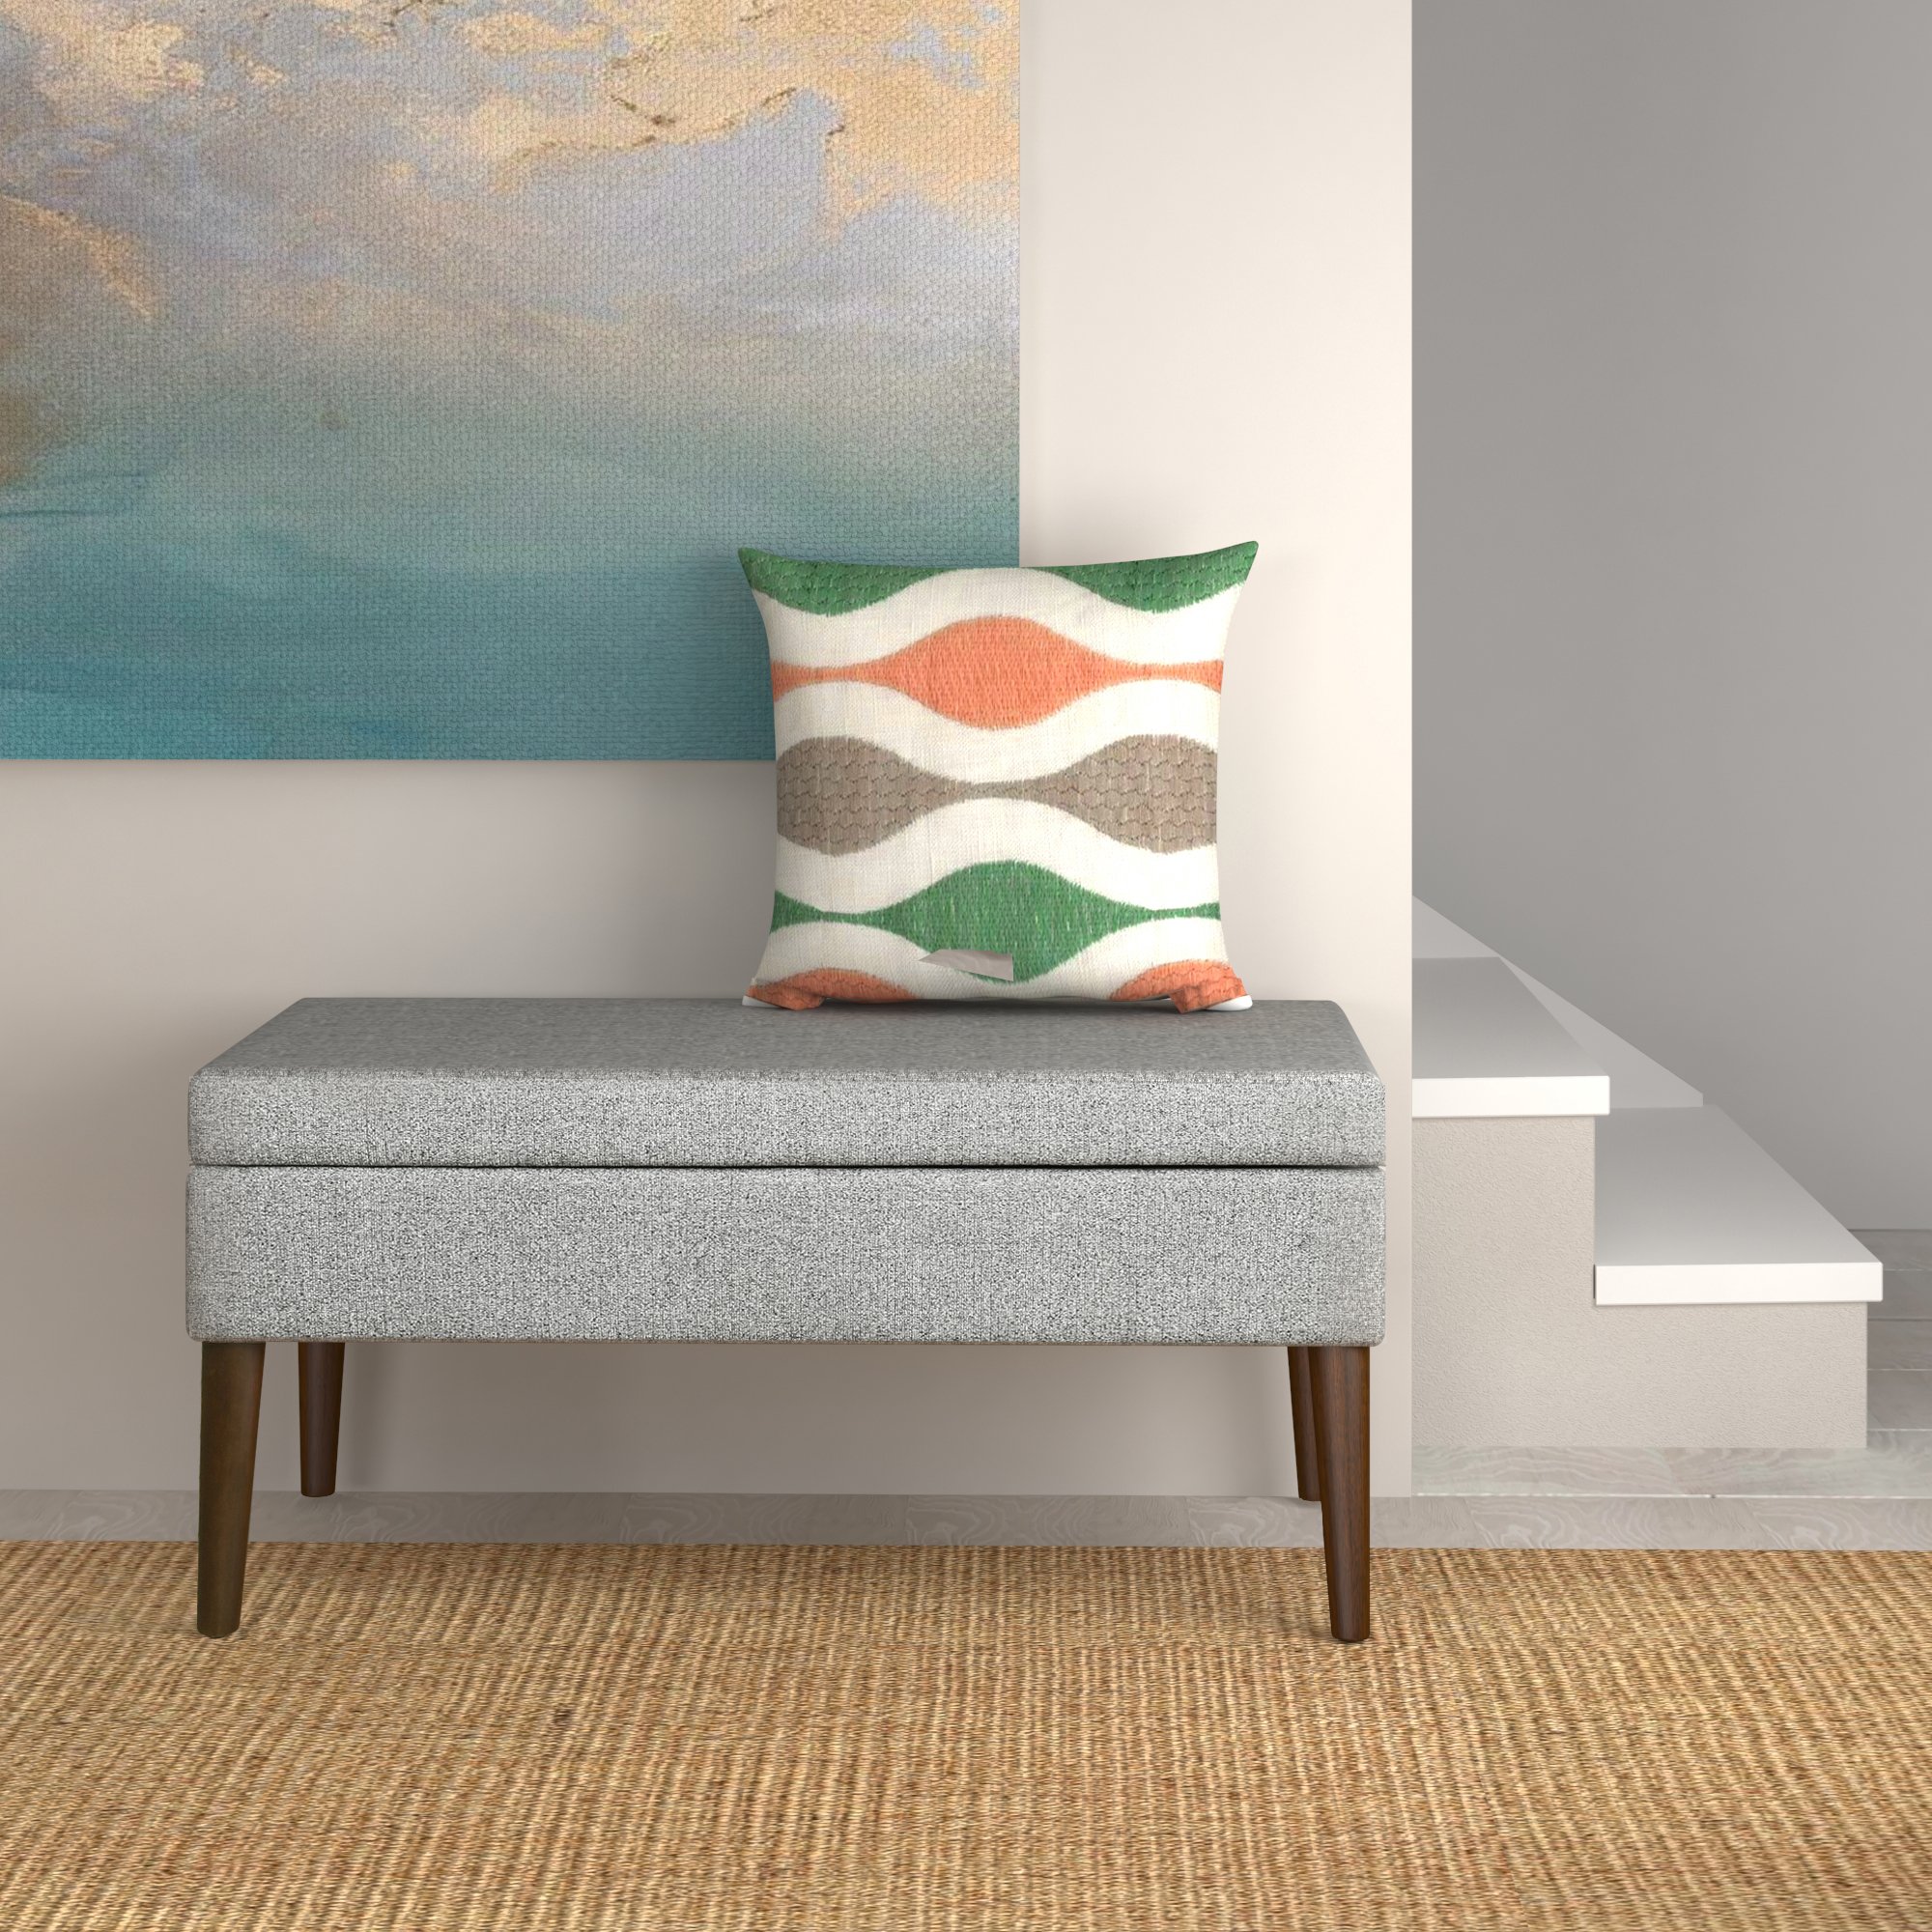 Spatial Order Home Decor | K8086-F2232 | Kaufmann Collection Modern Storage Ottoman Bench | Large Ottoman Bench with Storage for Living Room & Bedroom, Smoke Gray